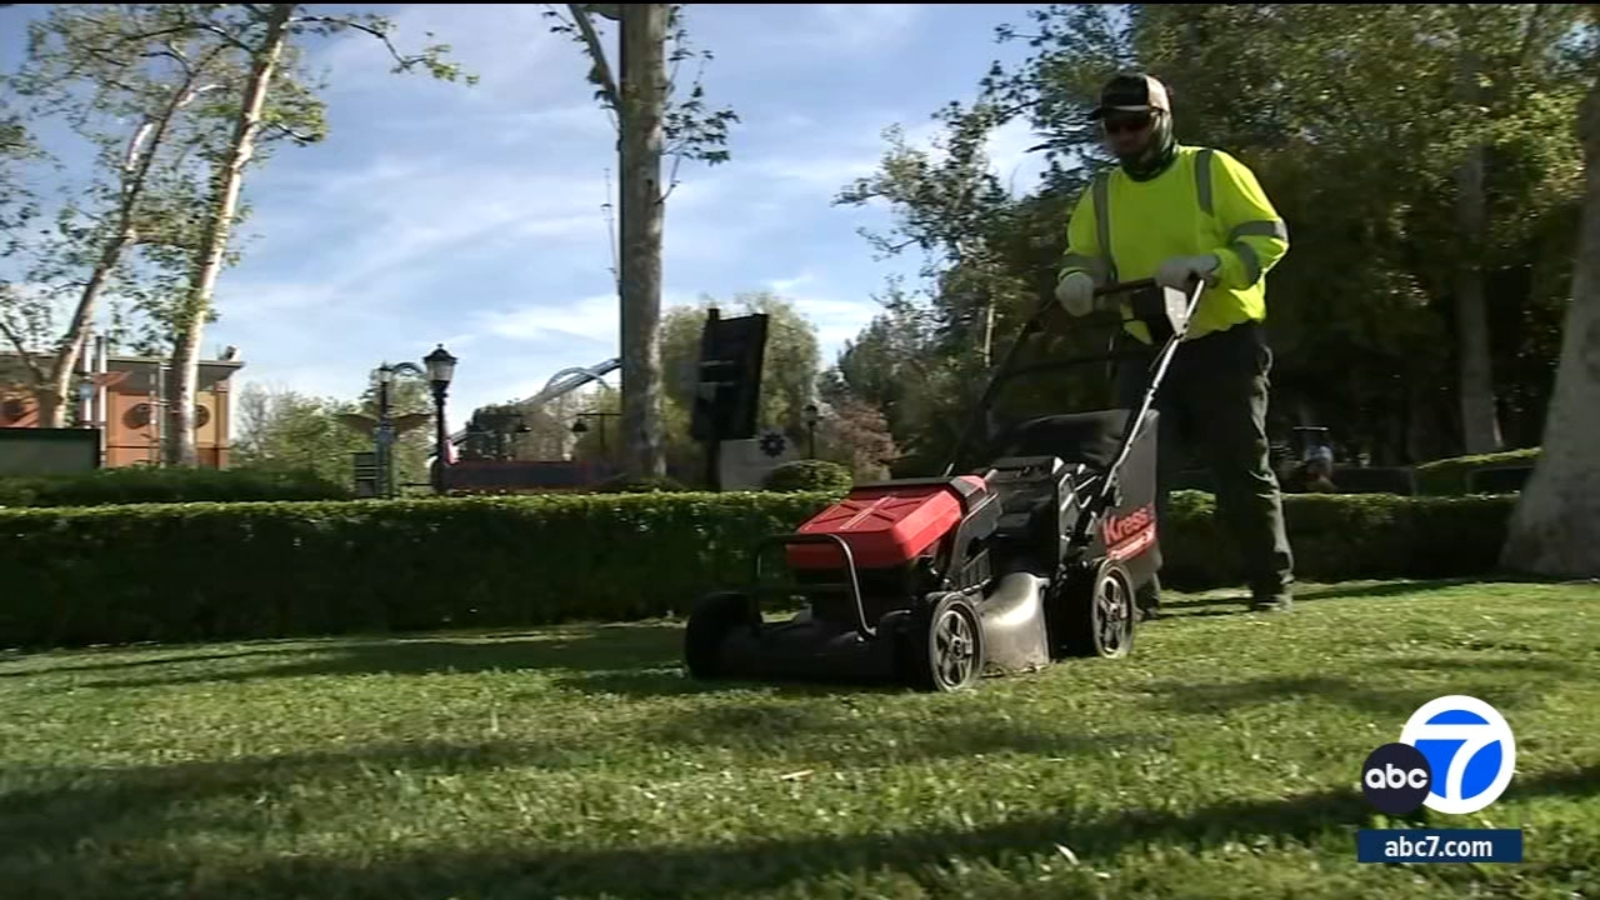 Magic Mountain switches to eco-friendly landscaping equipment to reduce noise, gas emissions